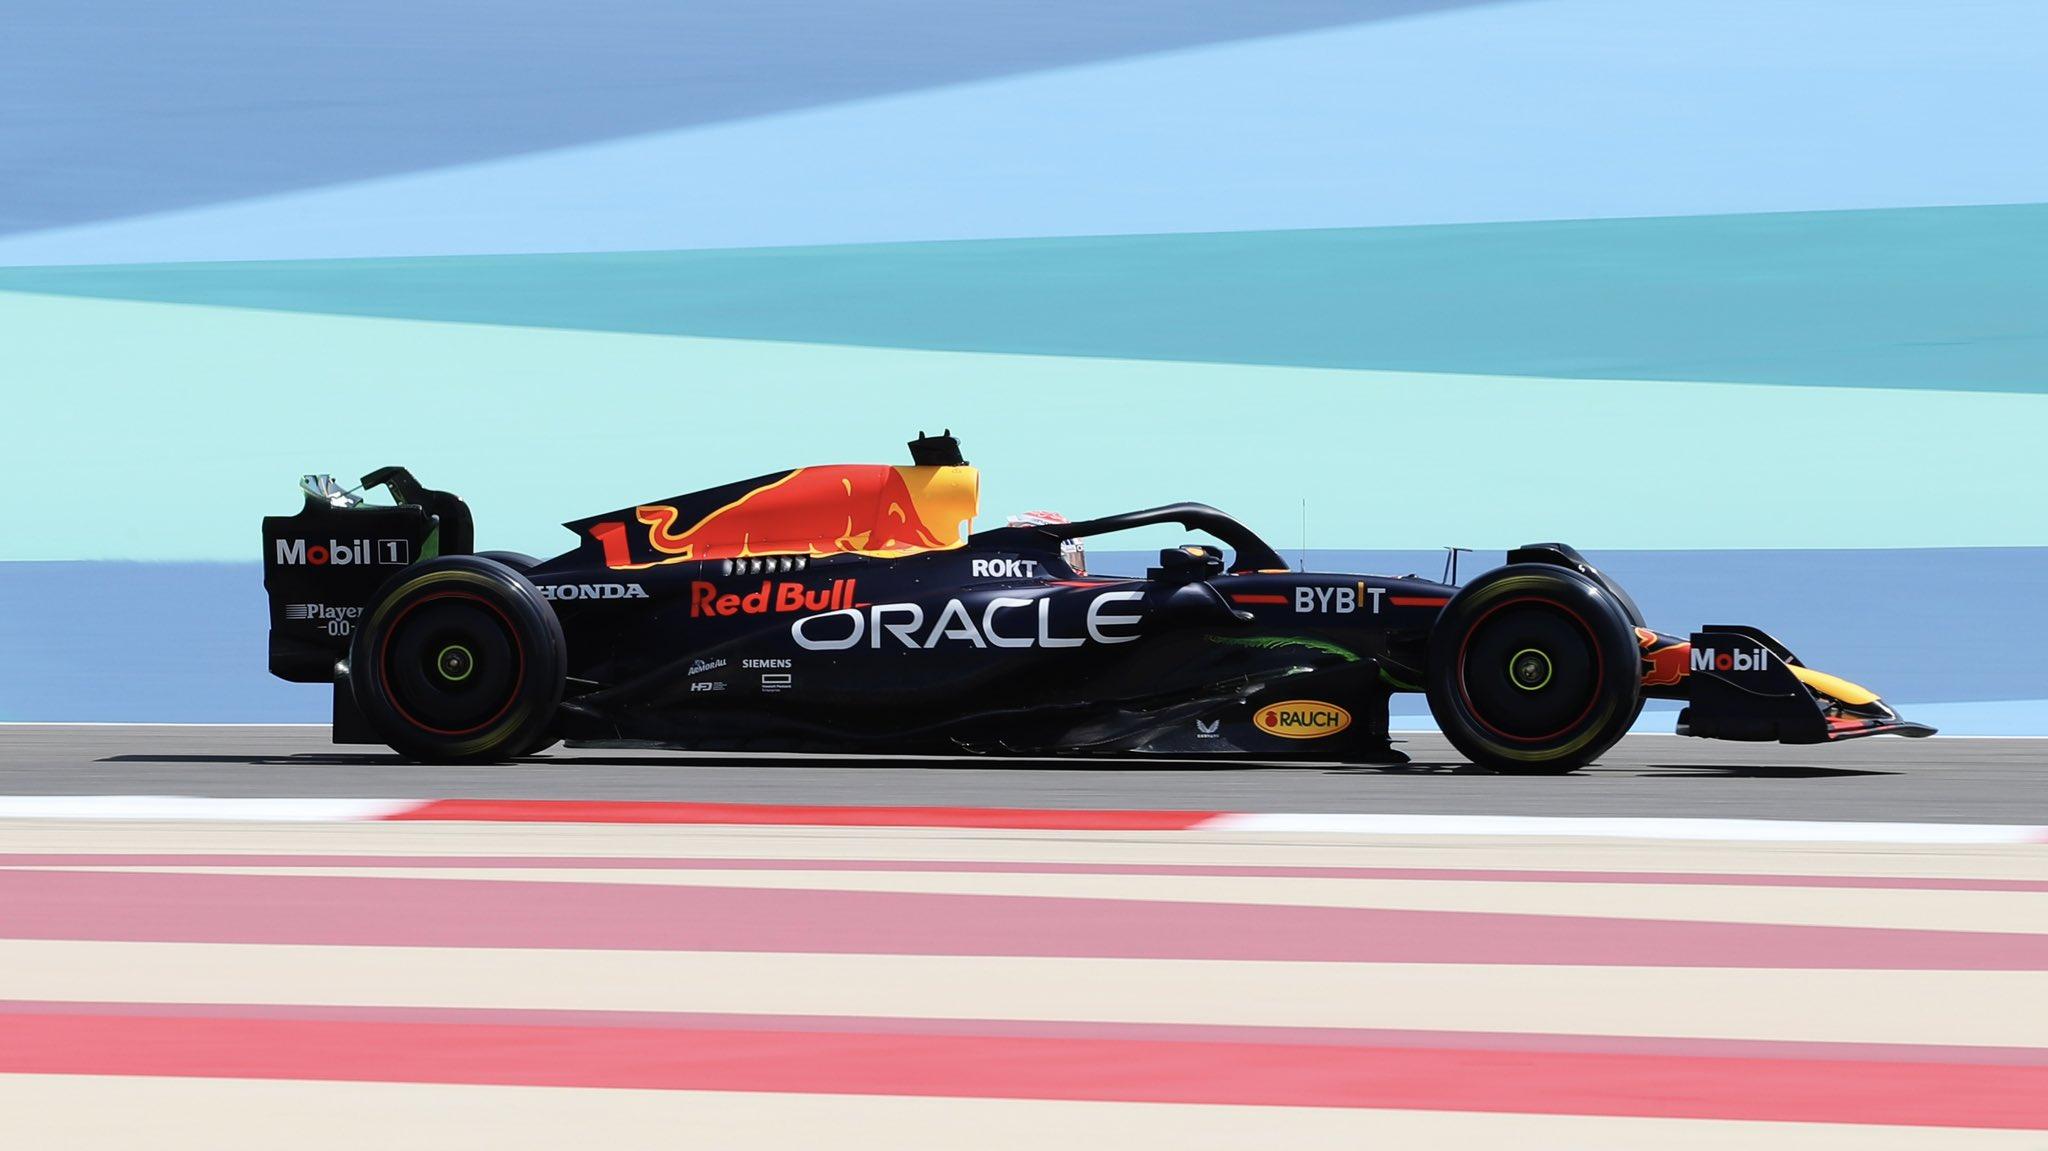  F1 Bahrain Grand Prix Preview Will Red Bull Racing Dominate